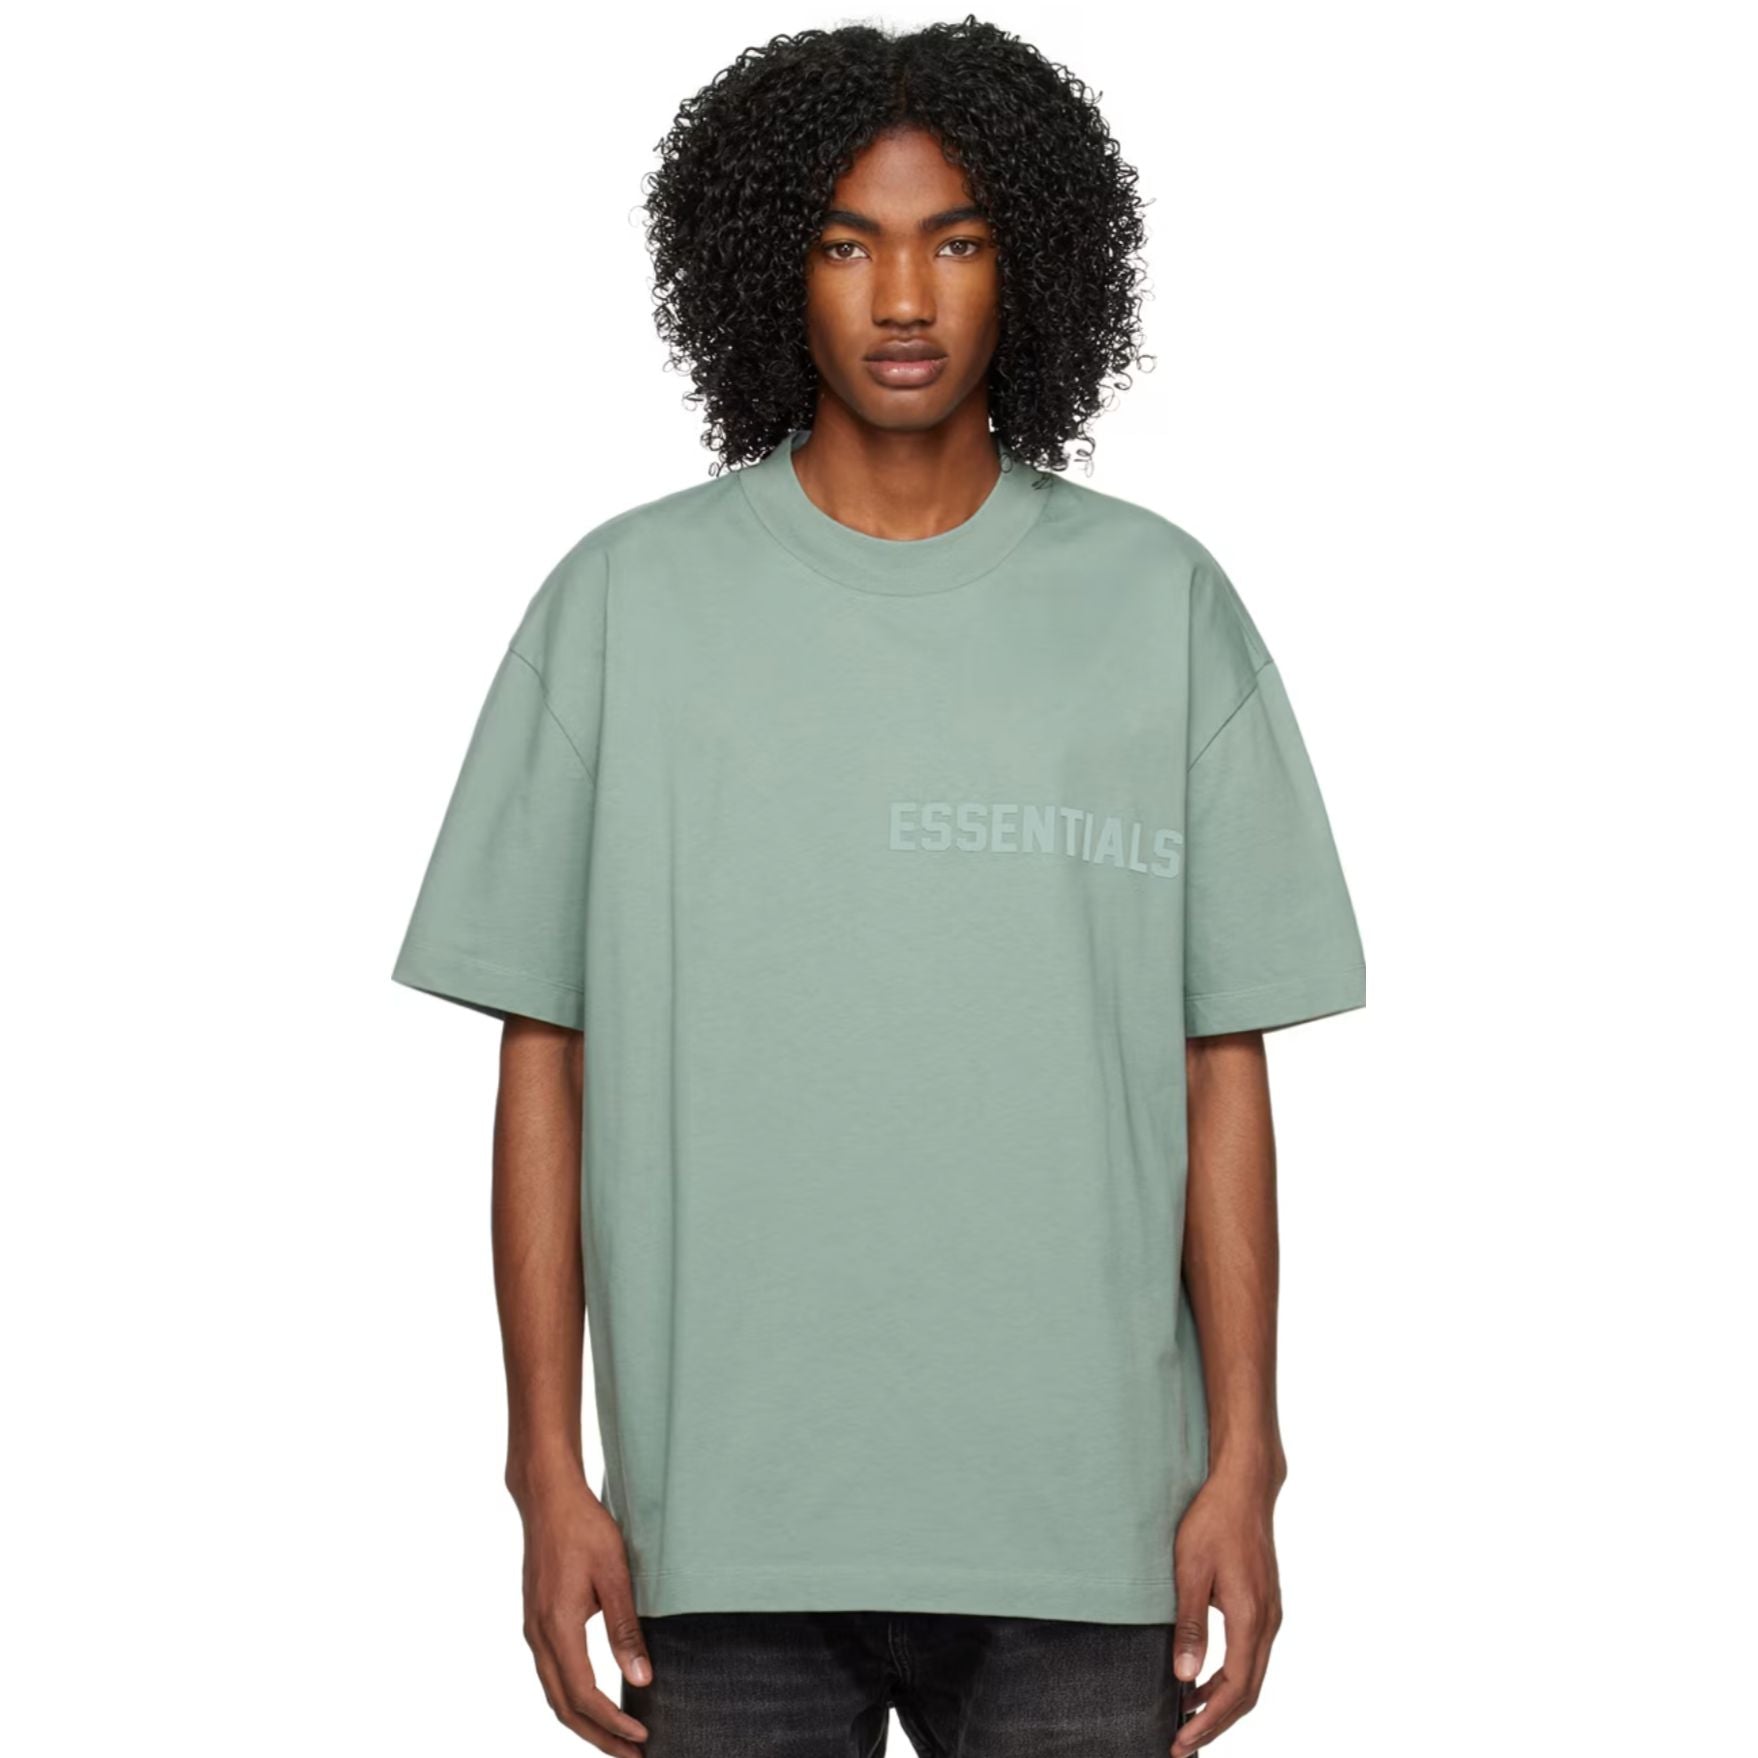 Fear Of God Essentials 'Sycamore' T-Shirt | Waves Never Die | Fear of God | T-Shirt